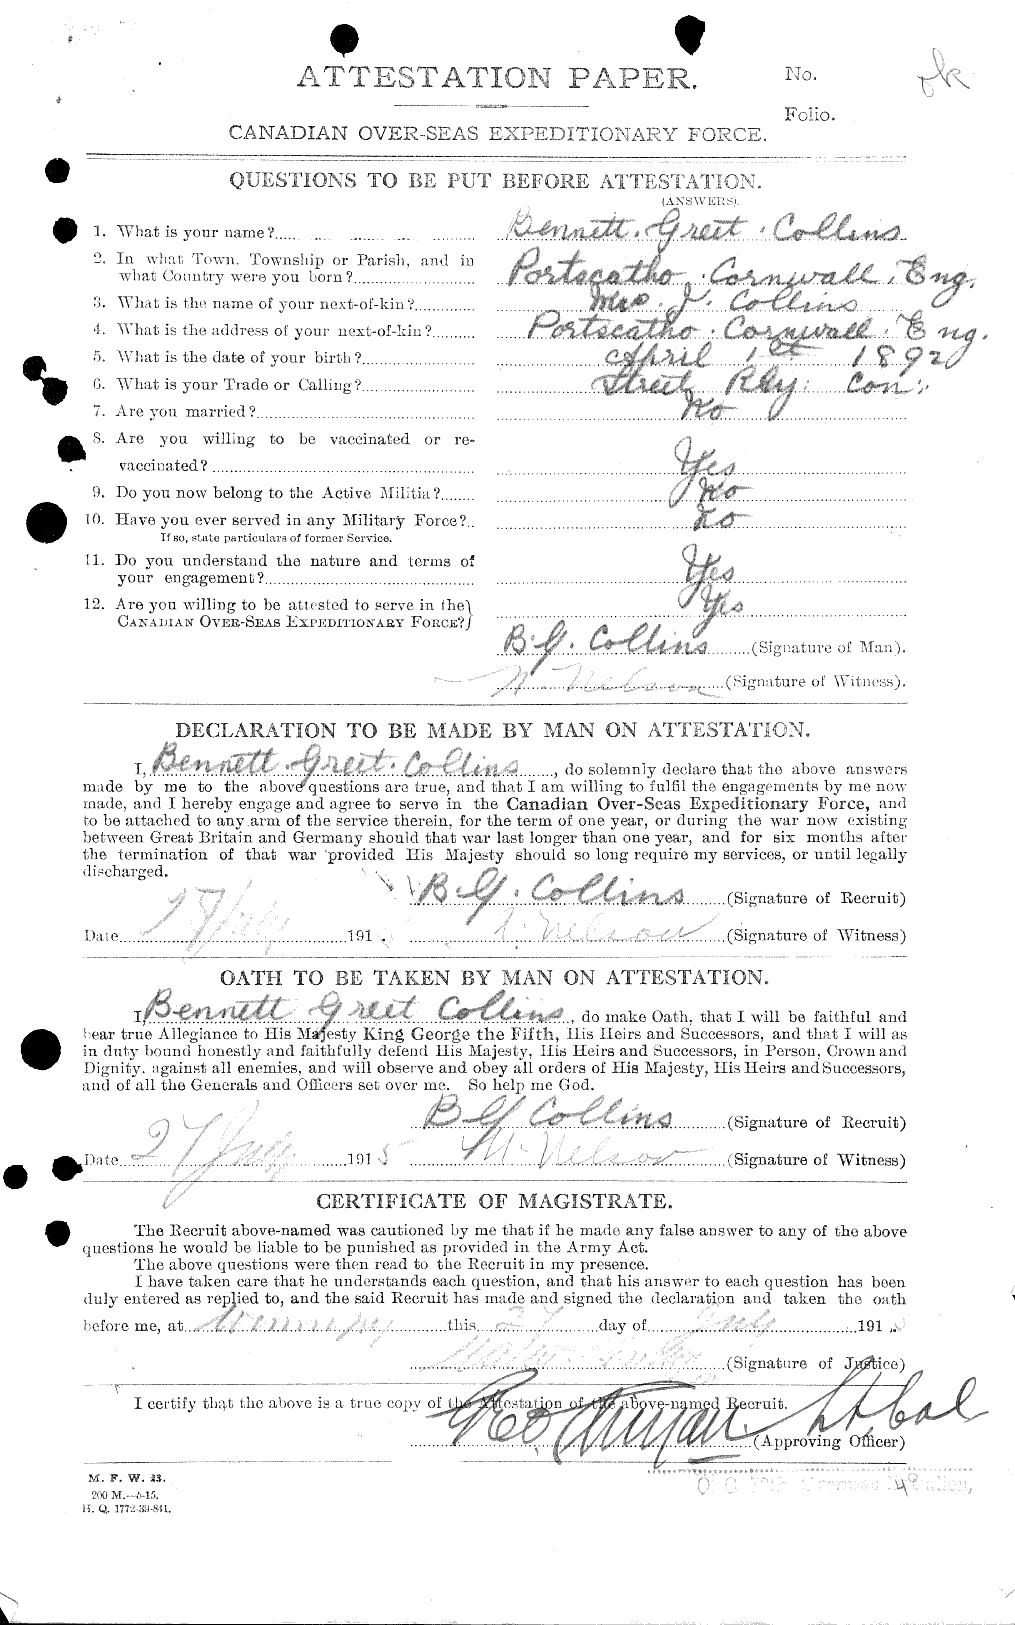 Personnel Records of the First World War - CEF 028993a